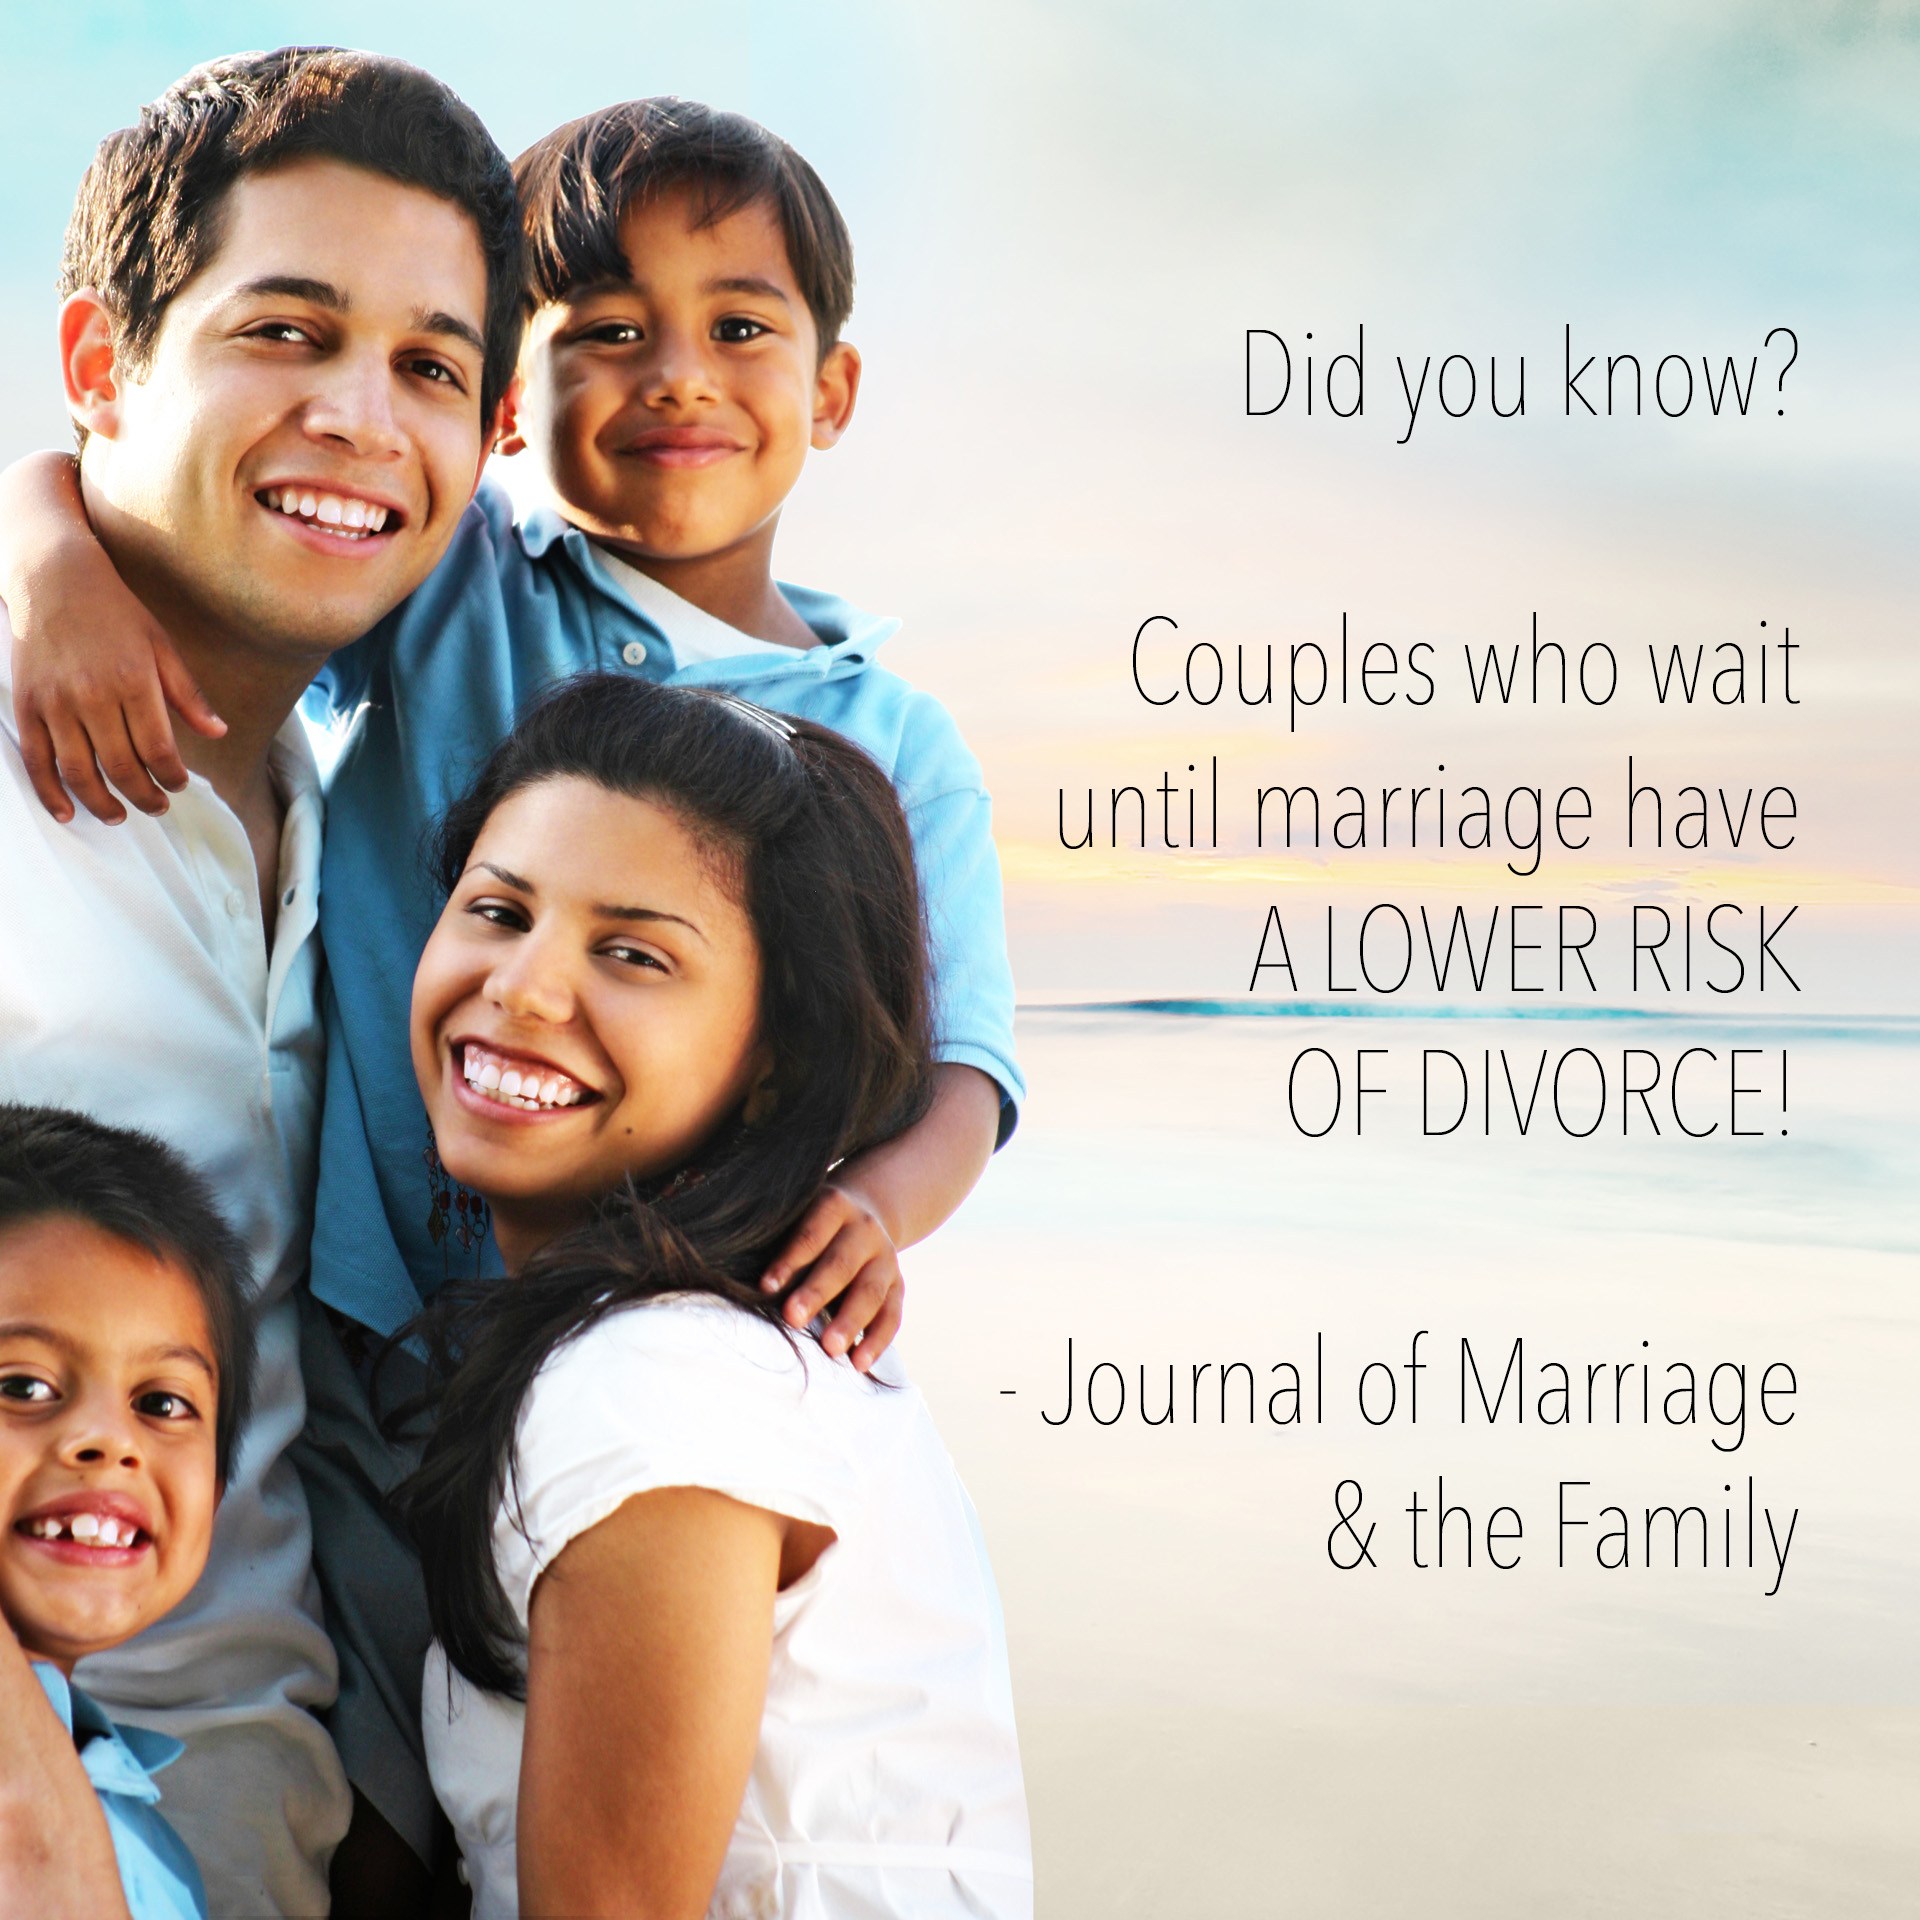 Did you know? Couples who wait until marriage have A LOWER RISK OF DIVORCE! - Journal of Marriage & the Family